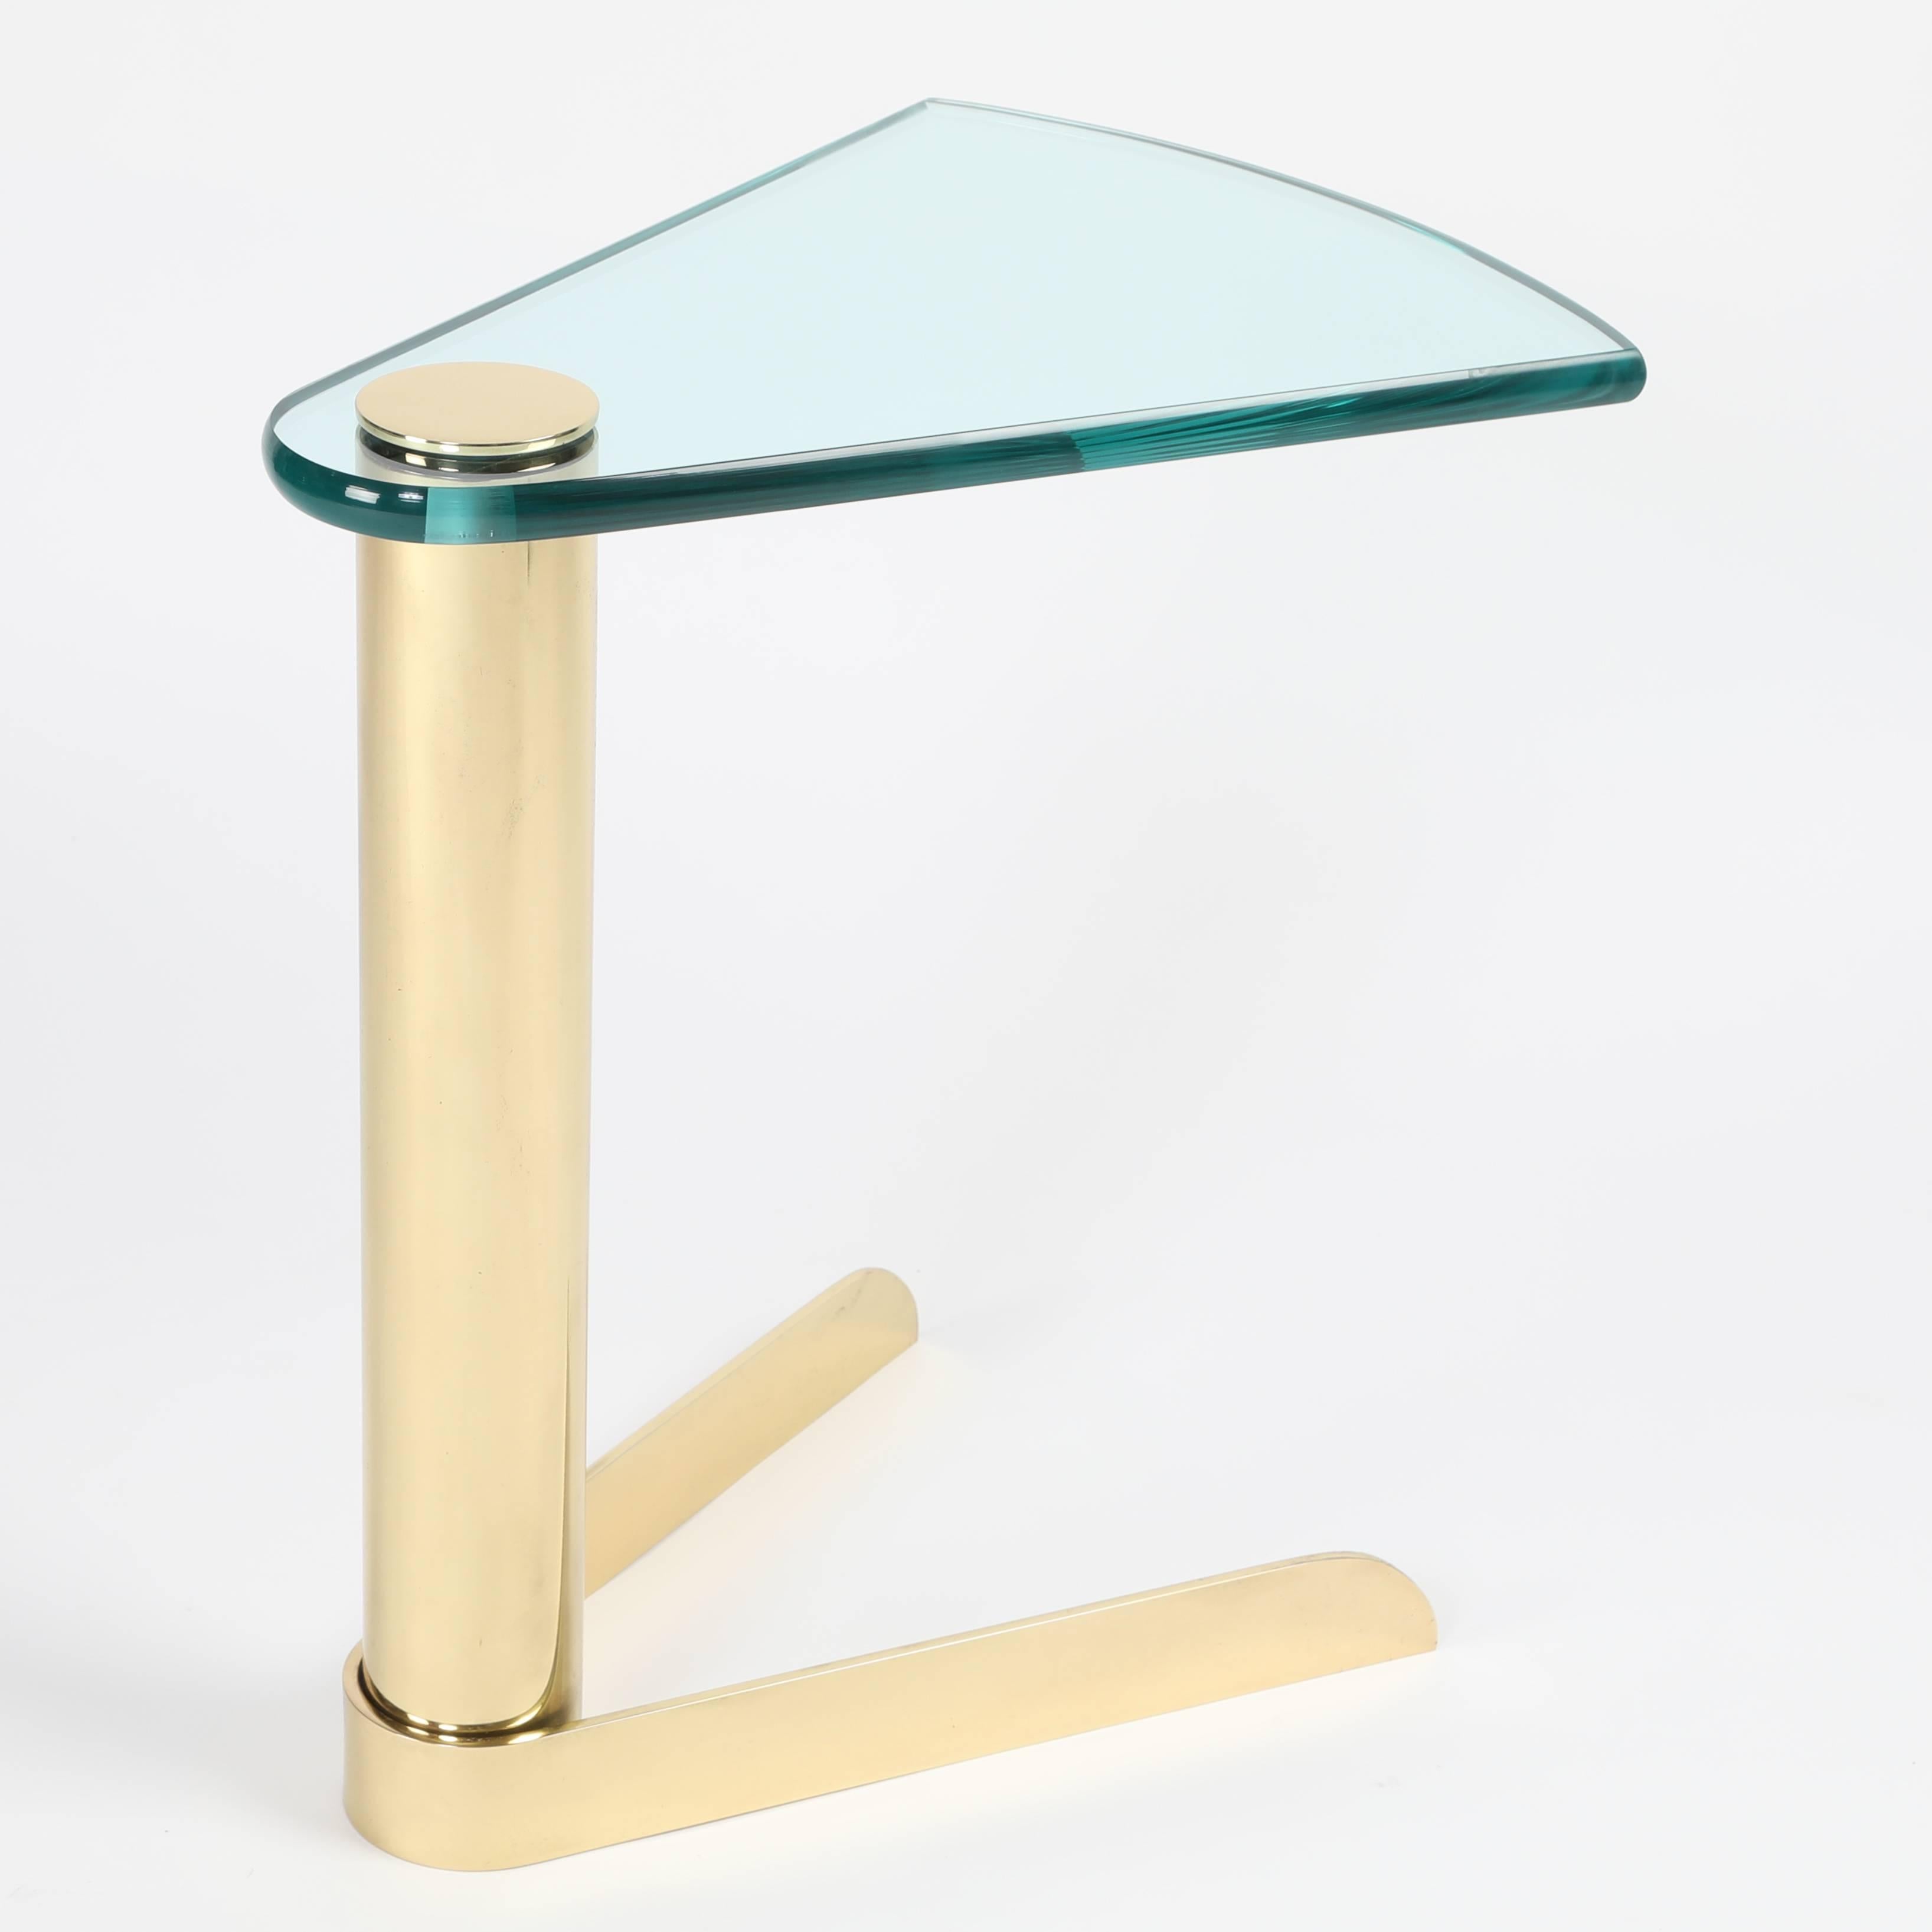 Polished 1970s Wedge-Shaped Occasional Table in Brass and Glass by Pace Furniture